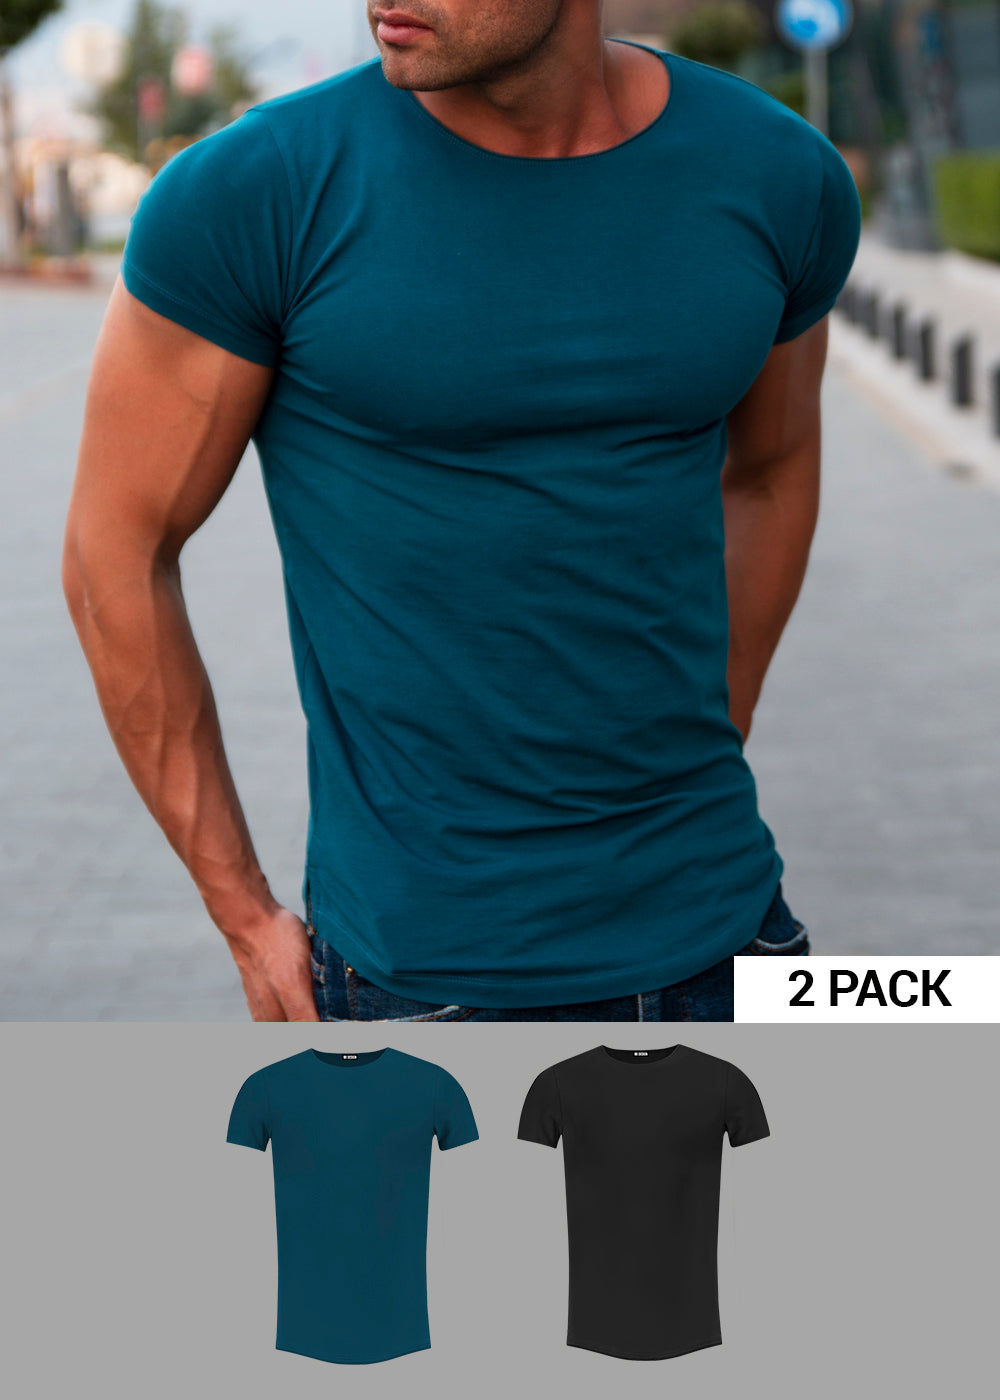 2 Pack Plain Ocean Blue and Black T-shirts - Round Neck Longline